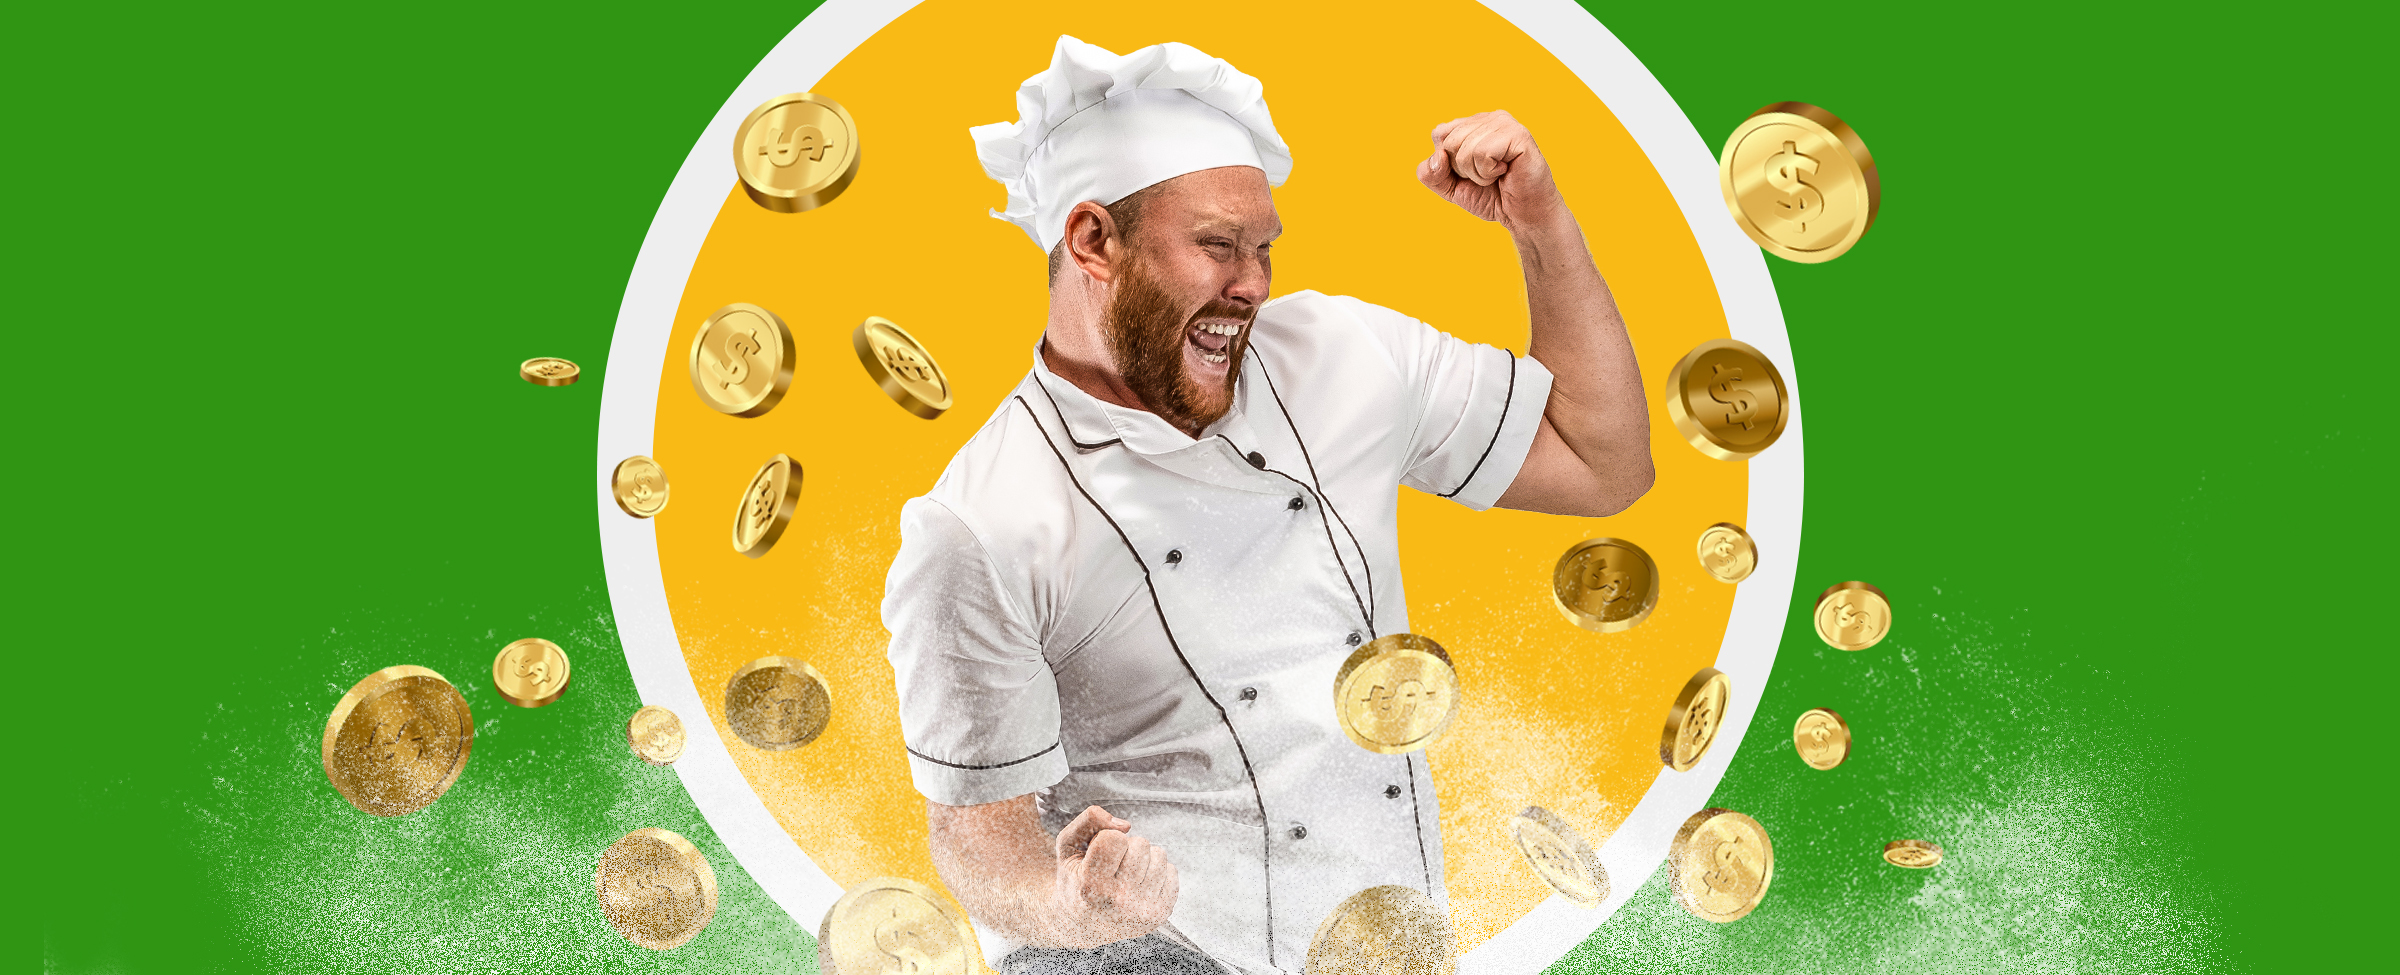 Alright, let’s be honest - you’re not here for the salad, you're here for the wins. On that note, dive into our top tips guide on the best way to make dough with Joe.